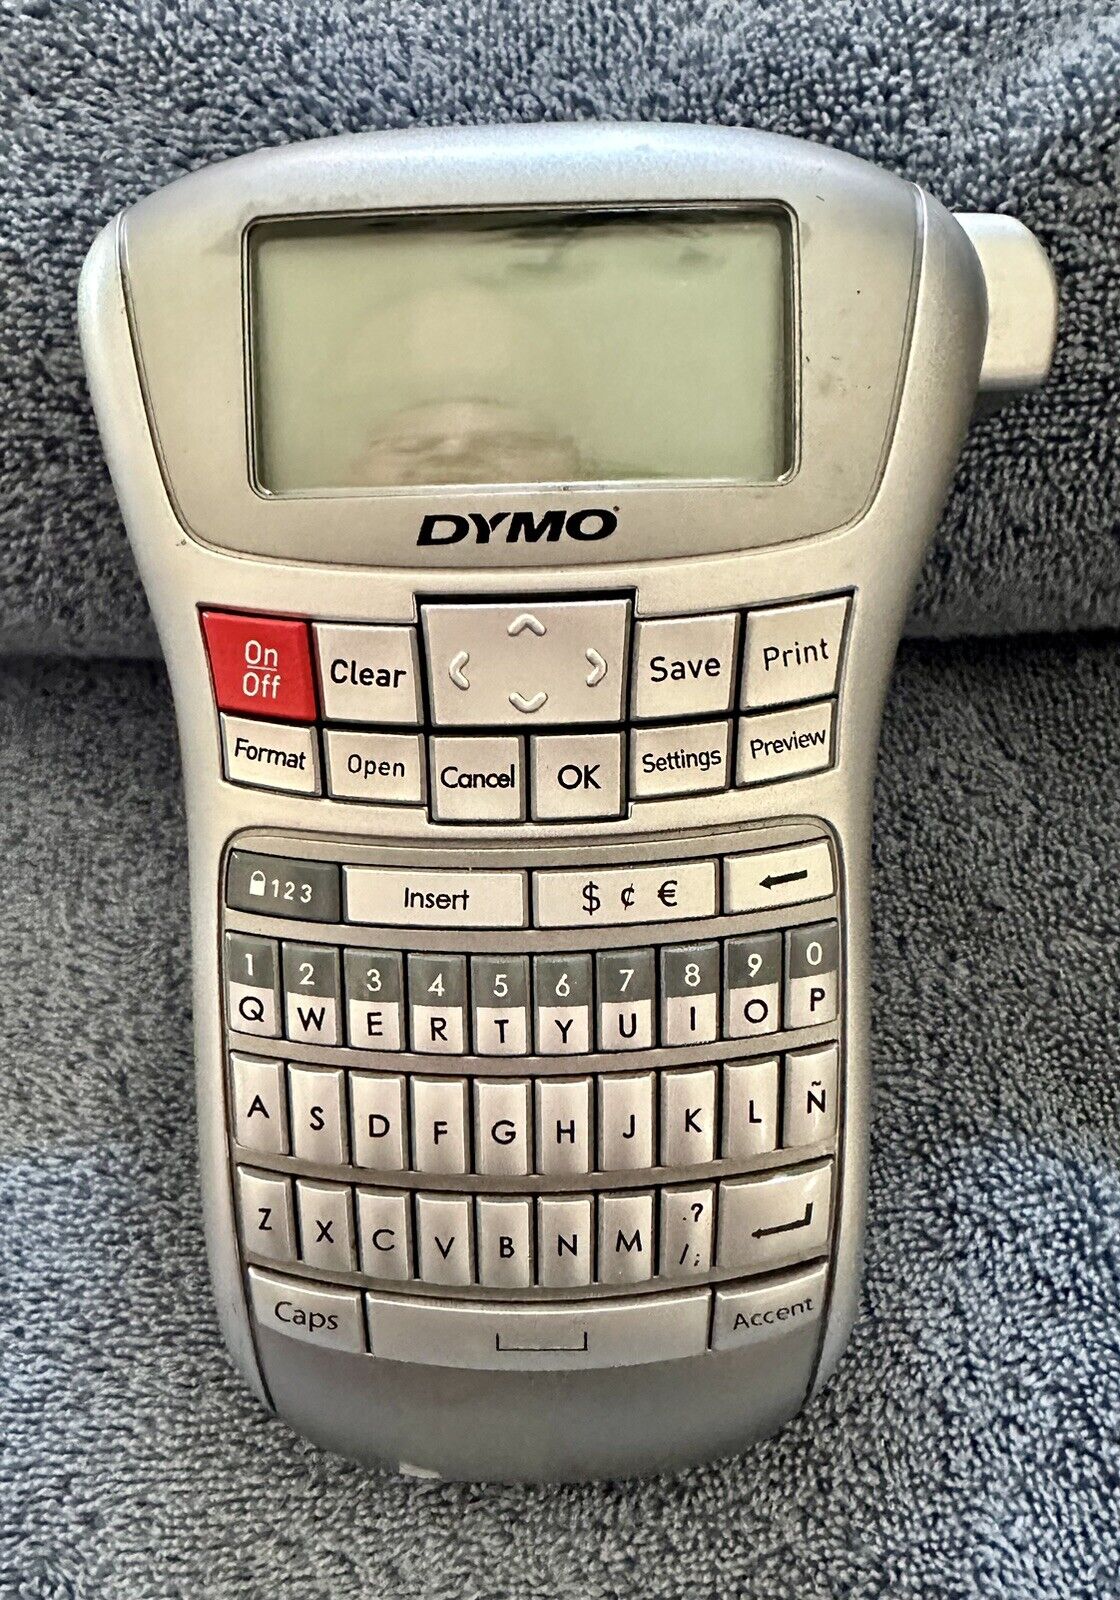 Dymo LabelManager 220p 1738347 Thermal Printer Portable Label Maker.. 